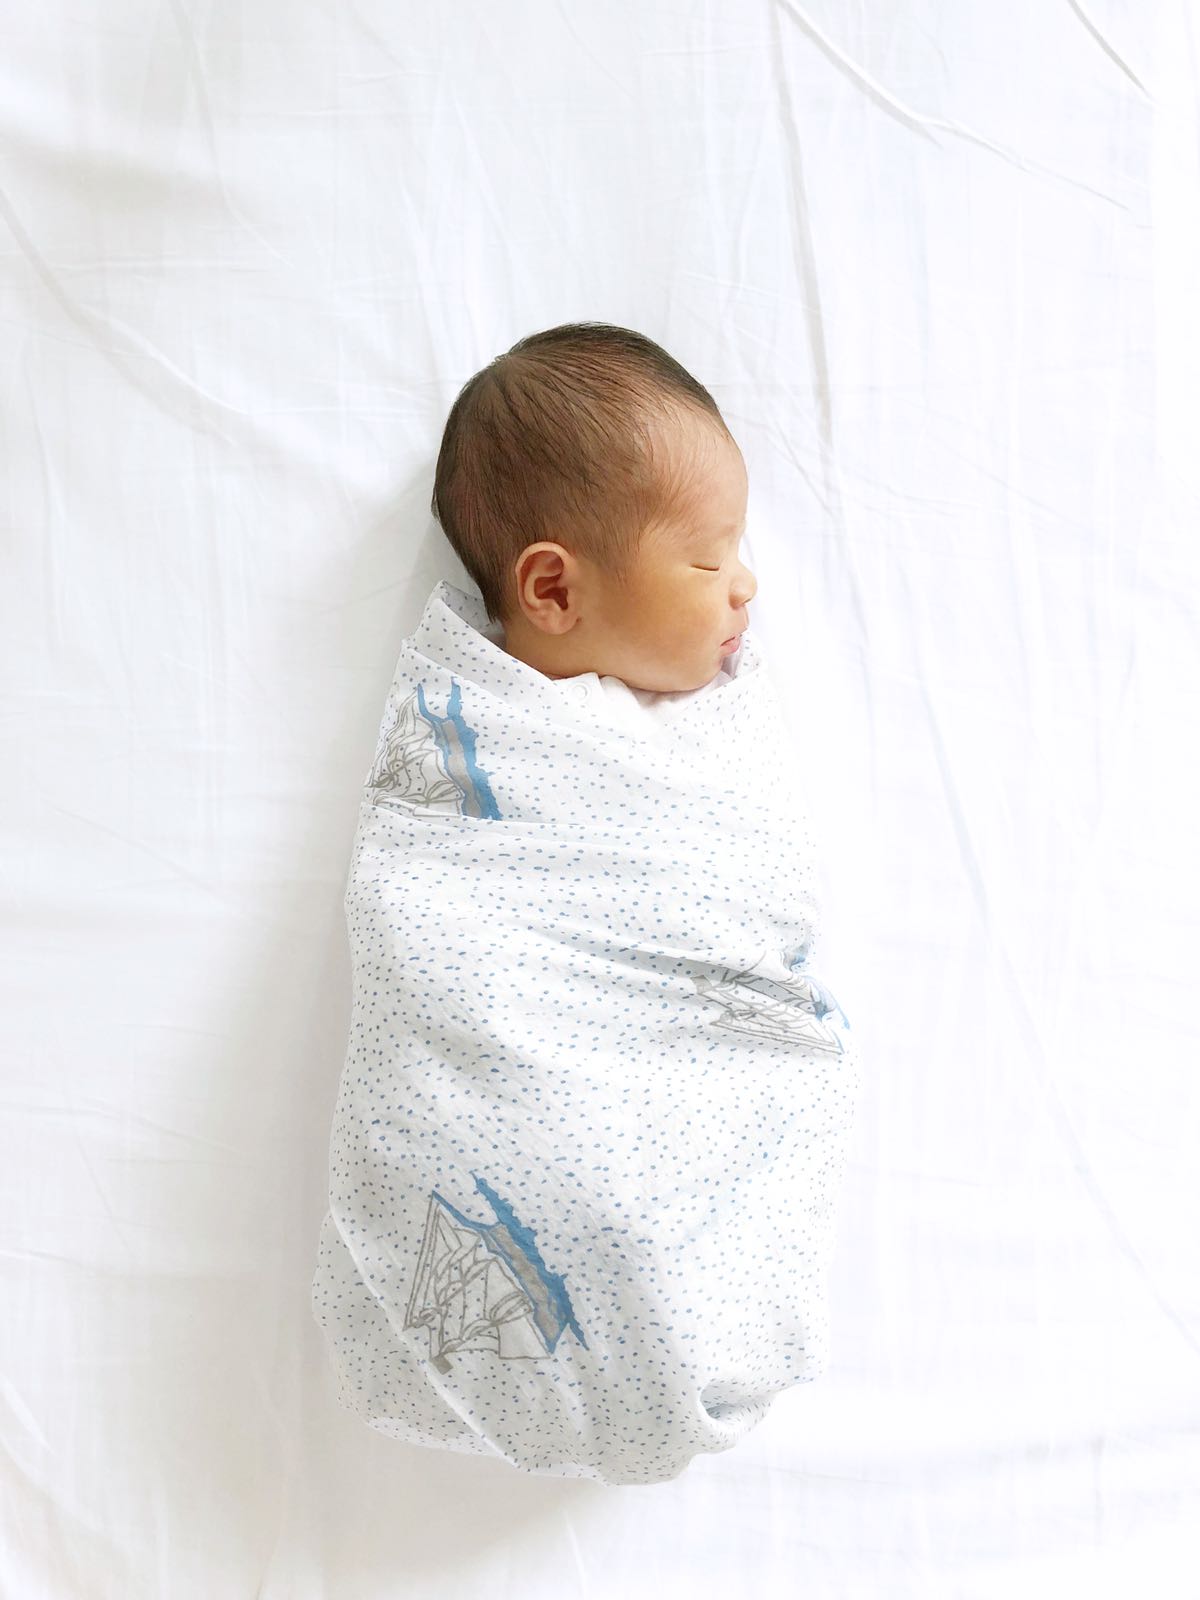 How to Swaddle a Baby - Le Petit Society Video